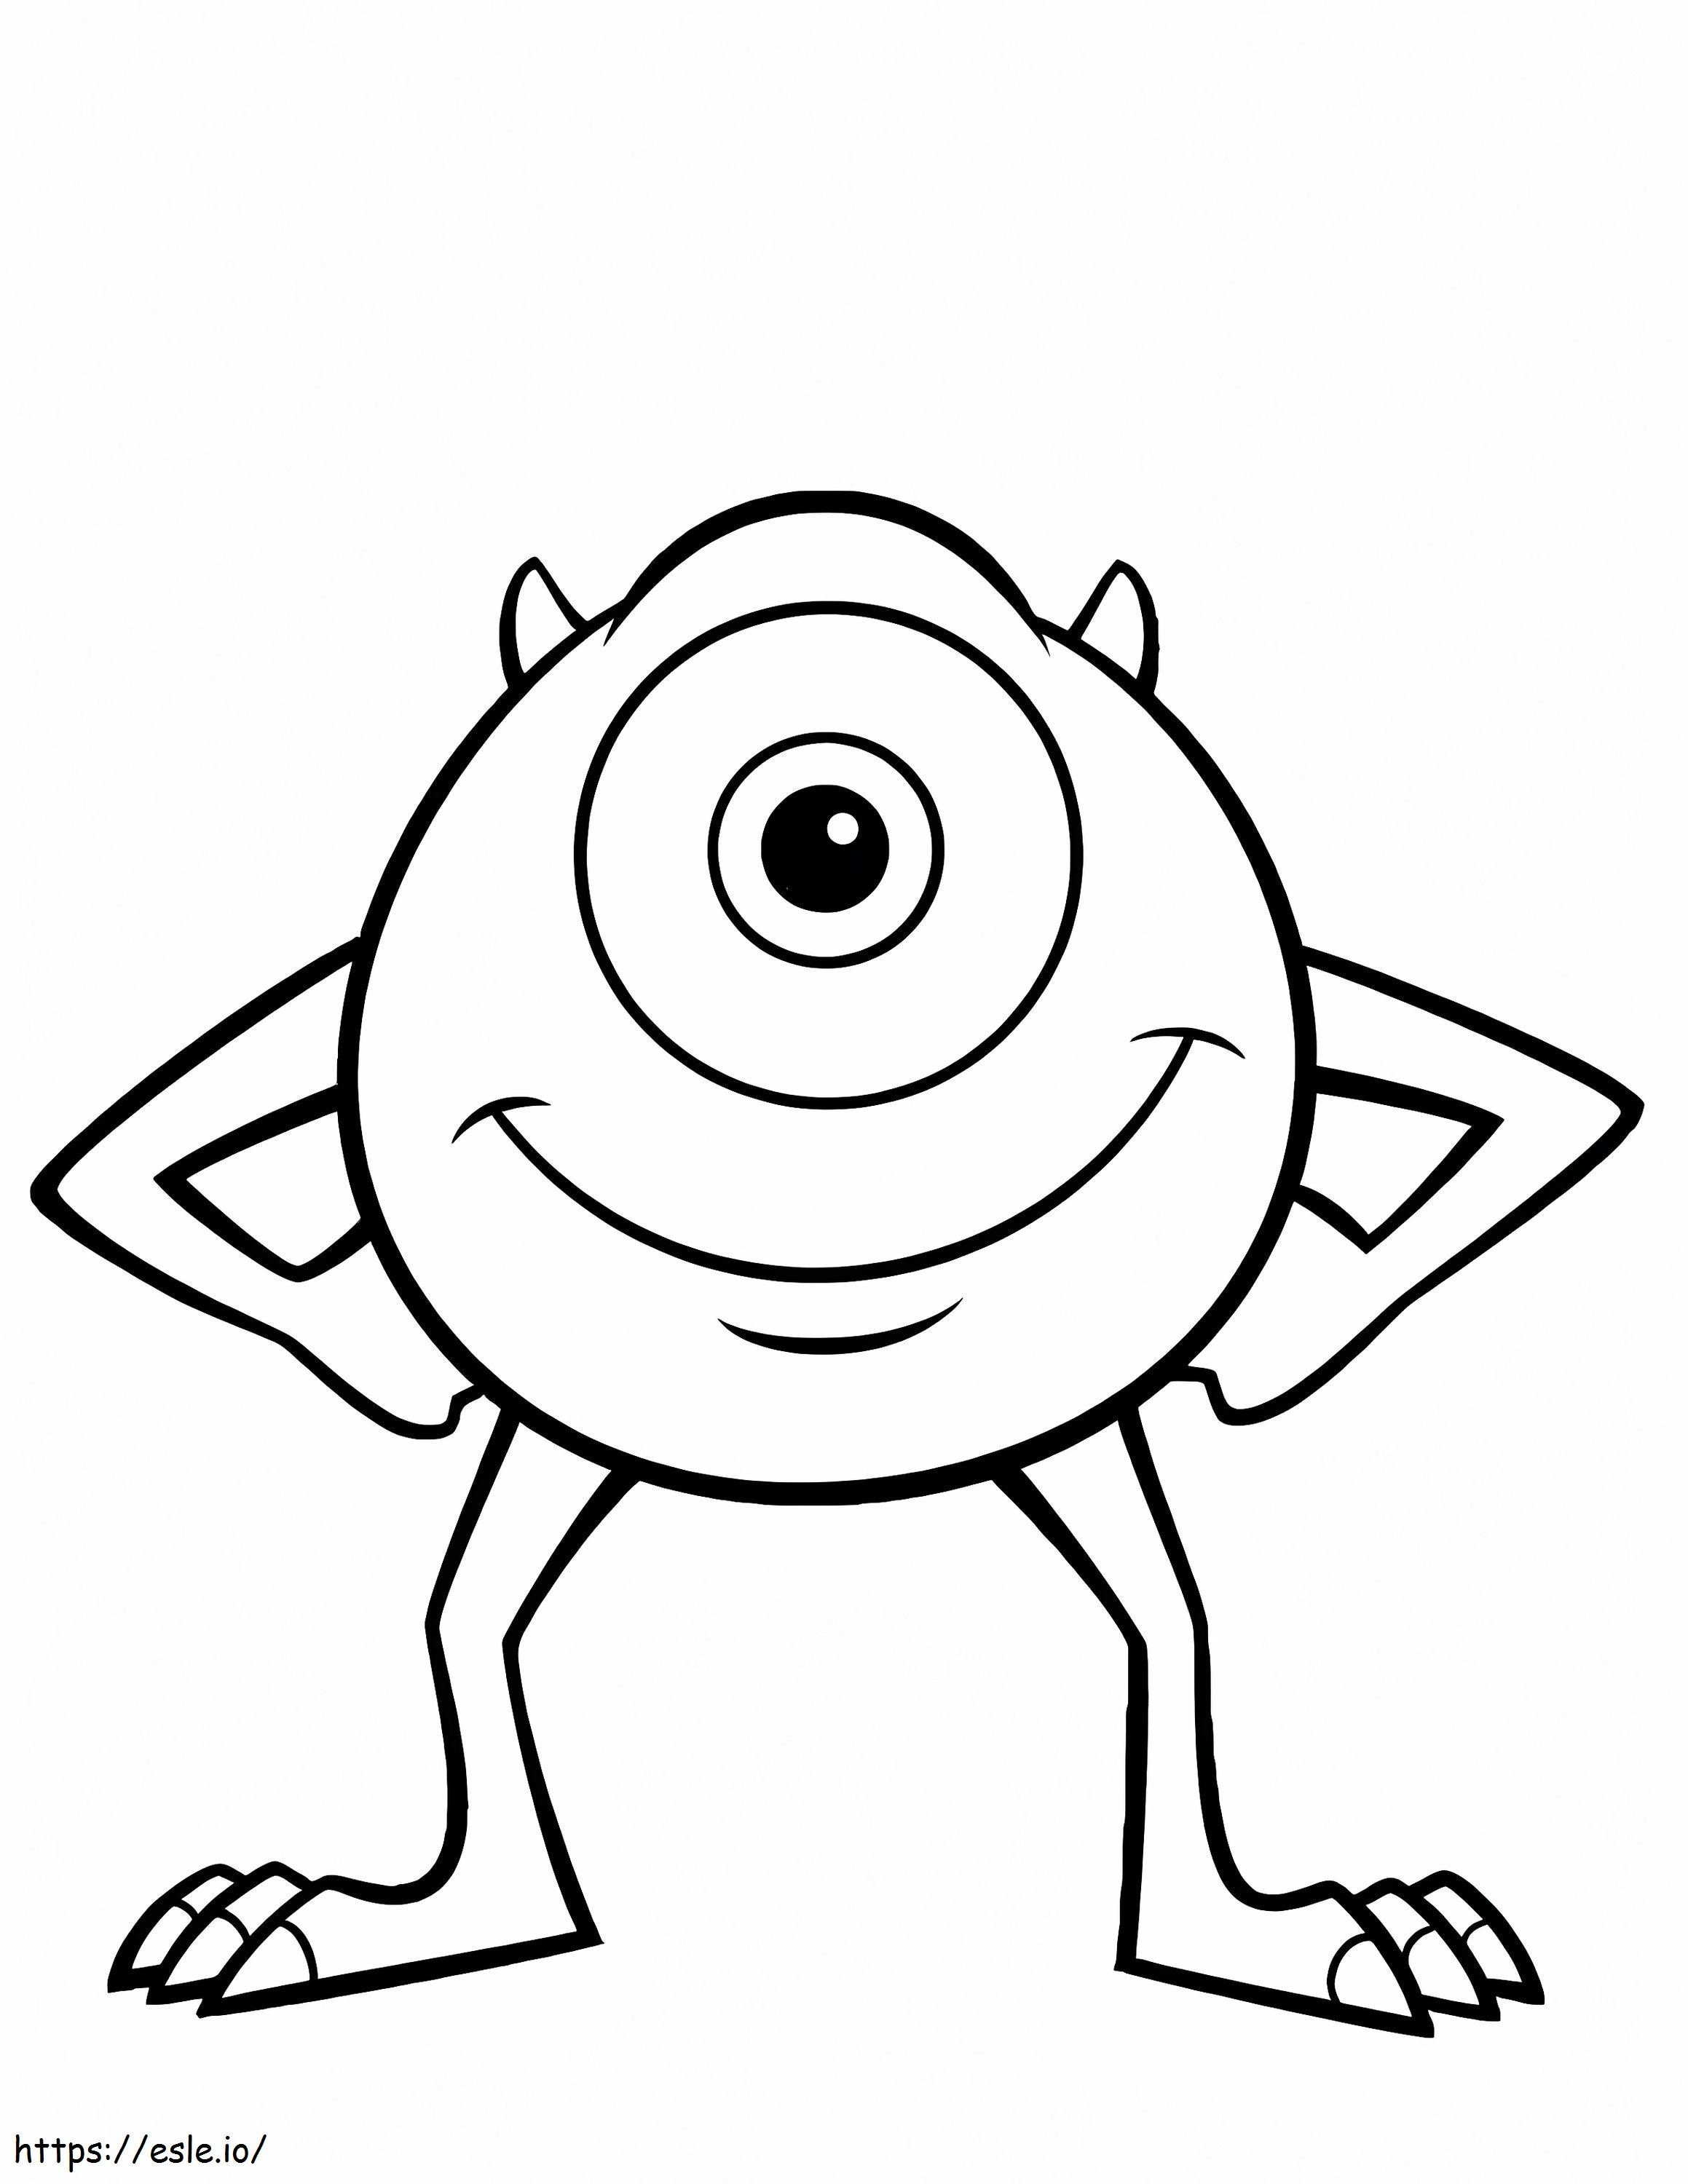 Smiling Monster coloring page